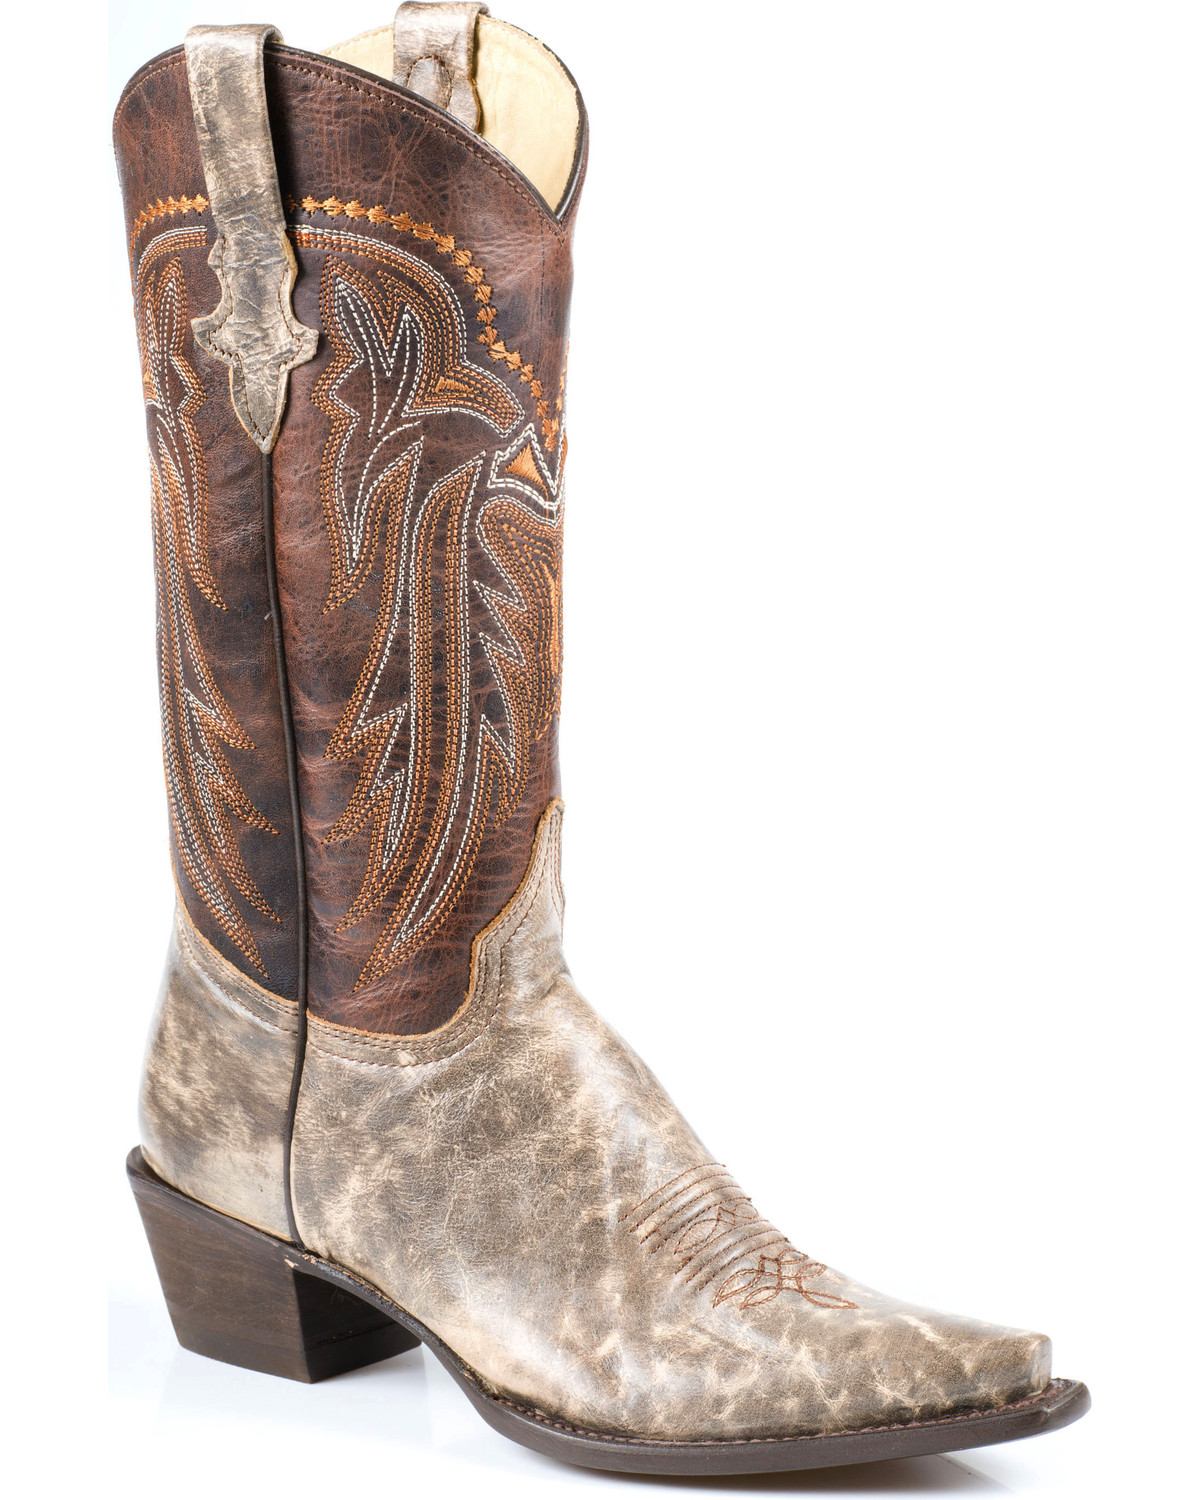 Stetson Women's Shelby Marbled Western Boots - Snip Toe